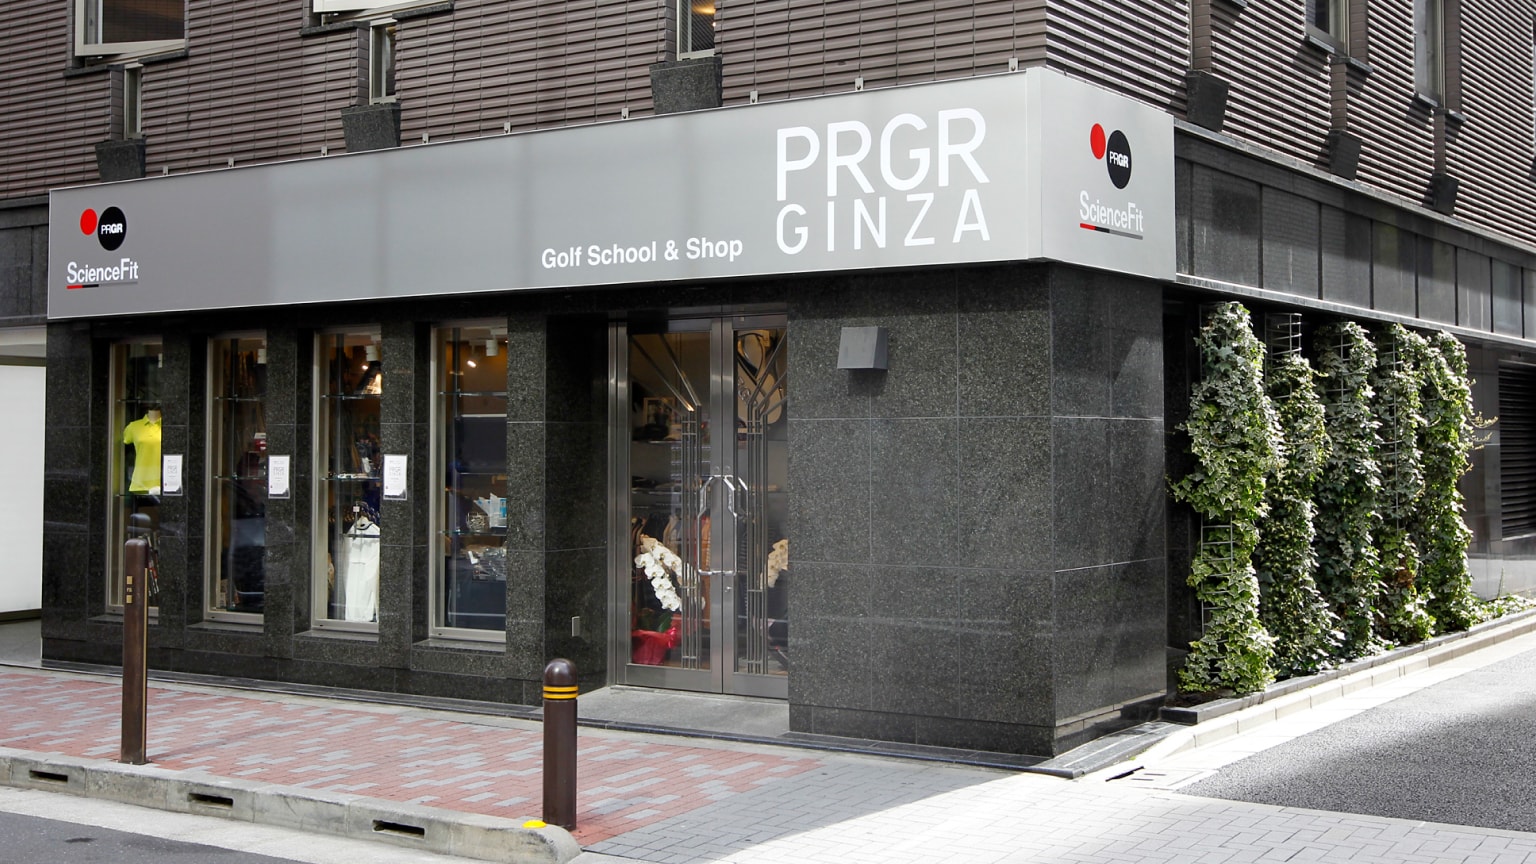 PRGR GINZA